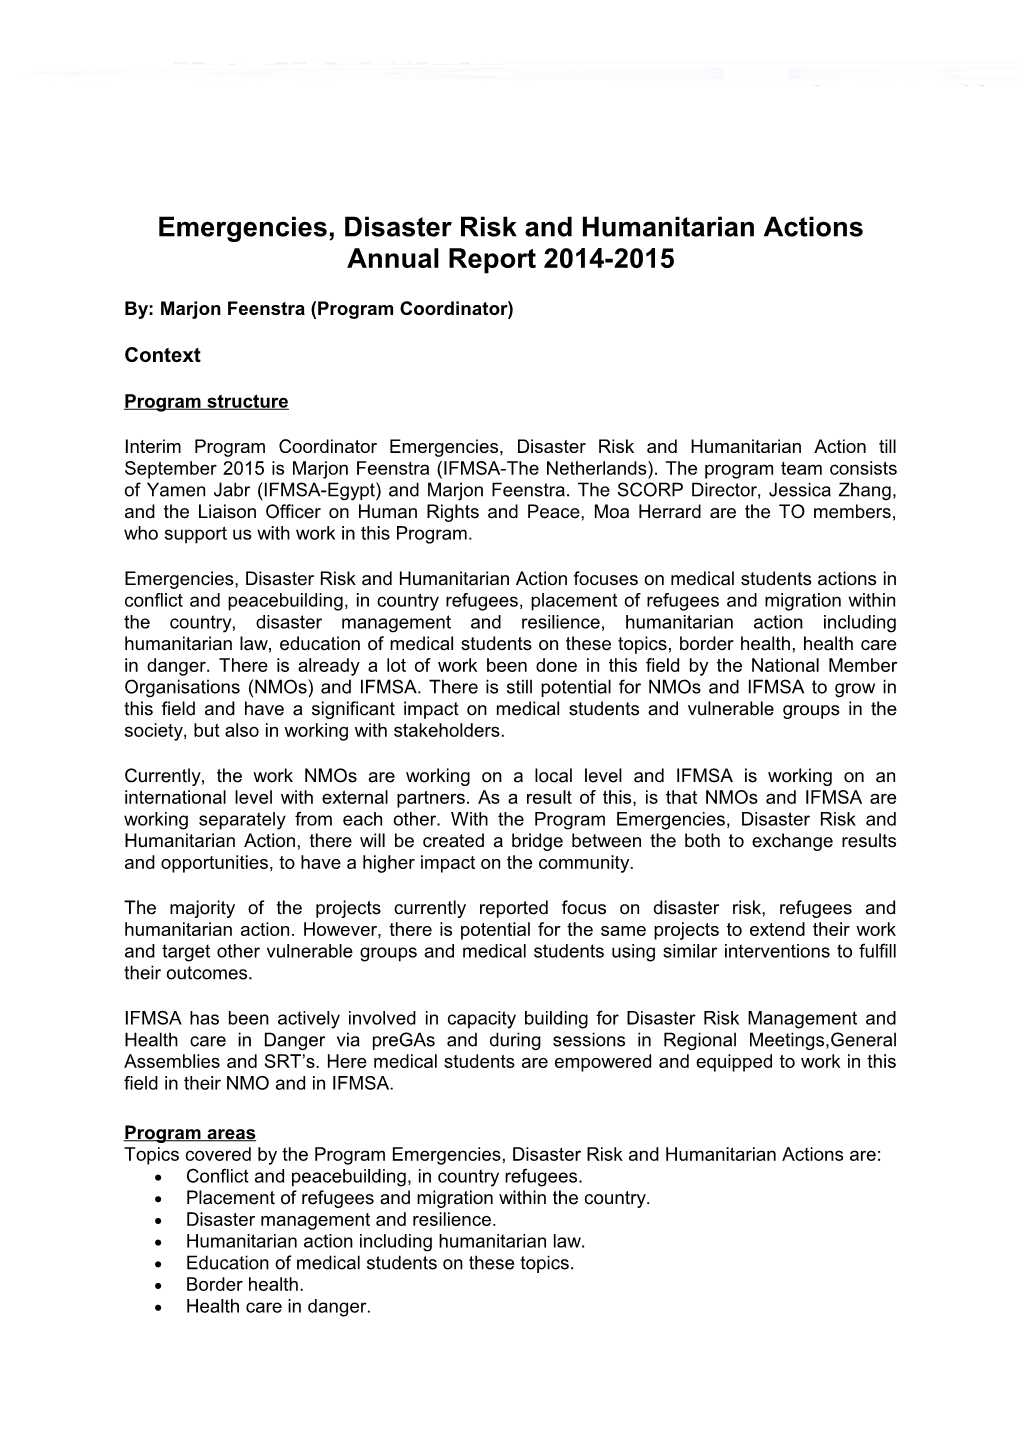 Emergencies, Disaster Risk and Humanitarian Actions Annual Report 2014-2015